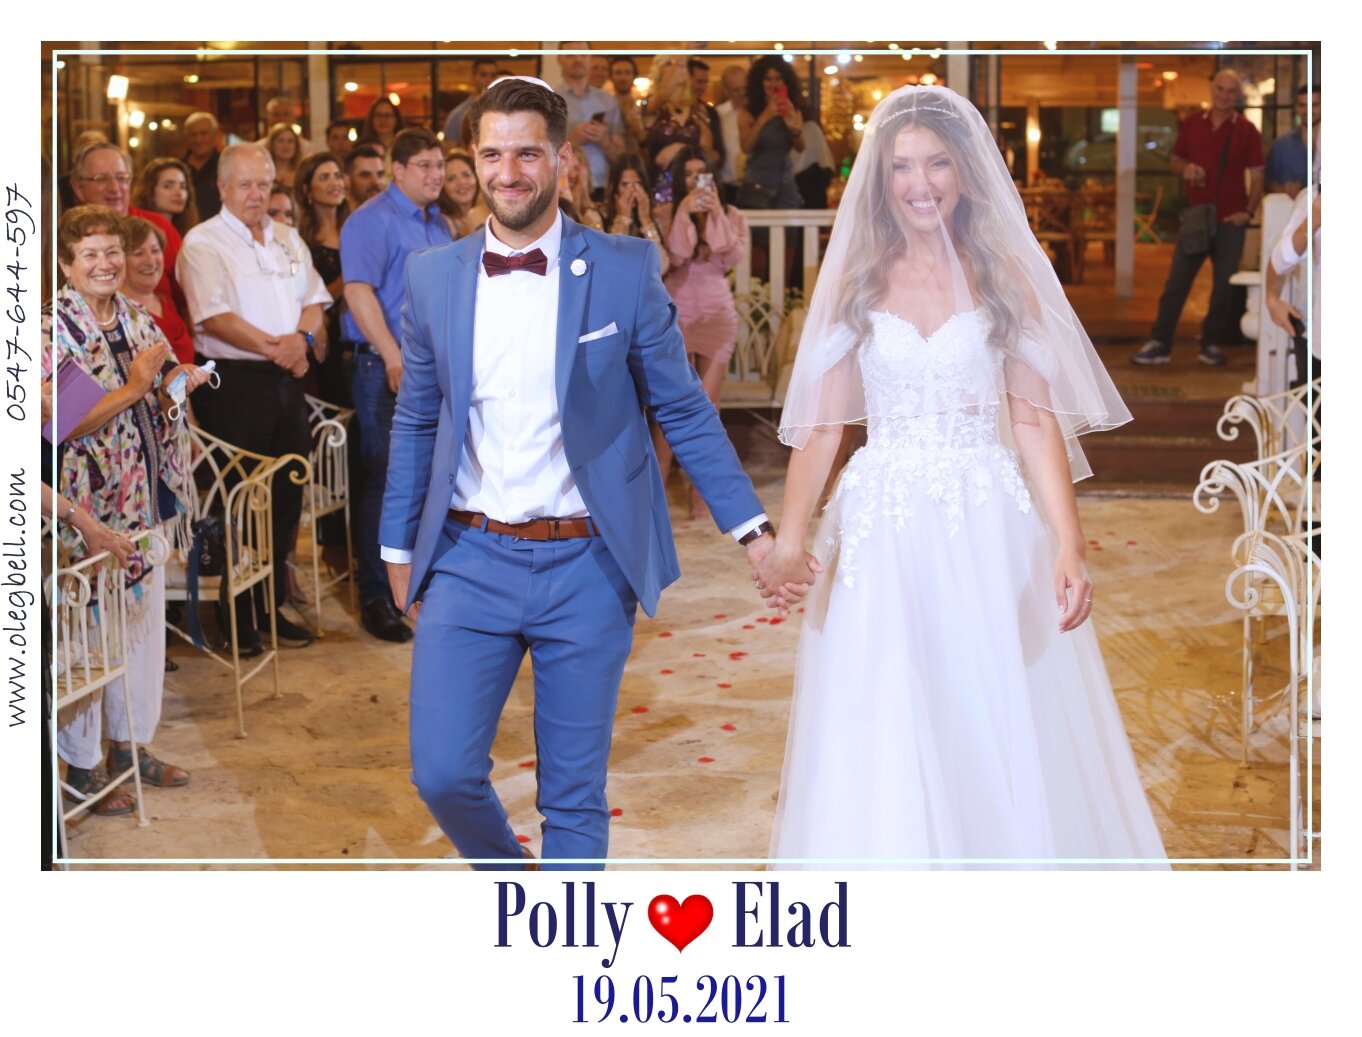 POLLY_AND_ELAD_WD_MG_SITE_021.JPG